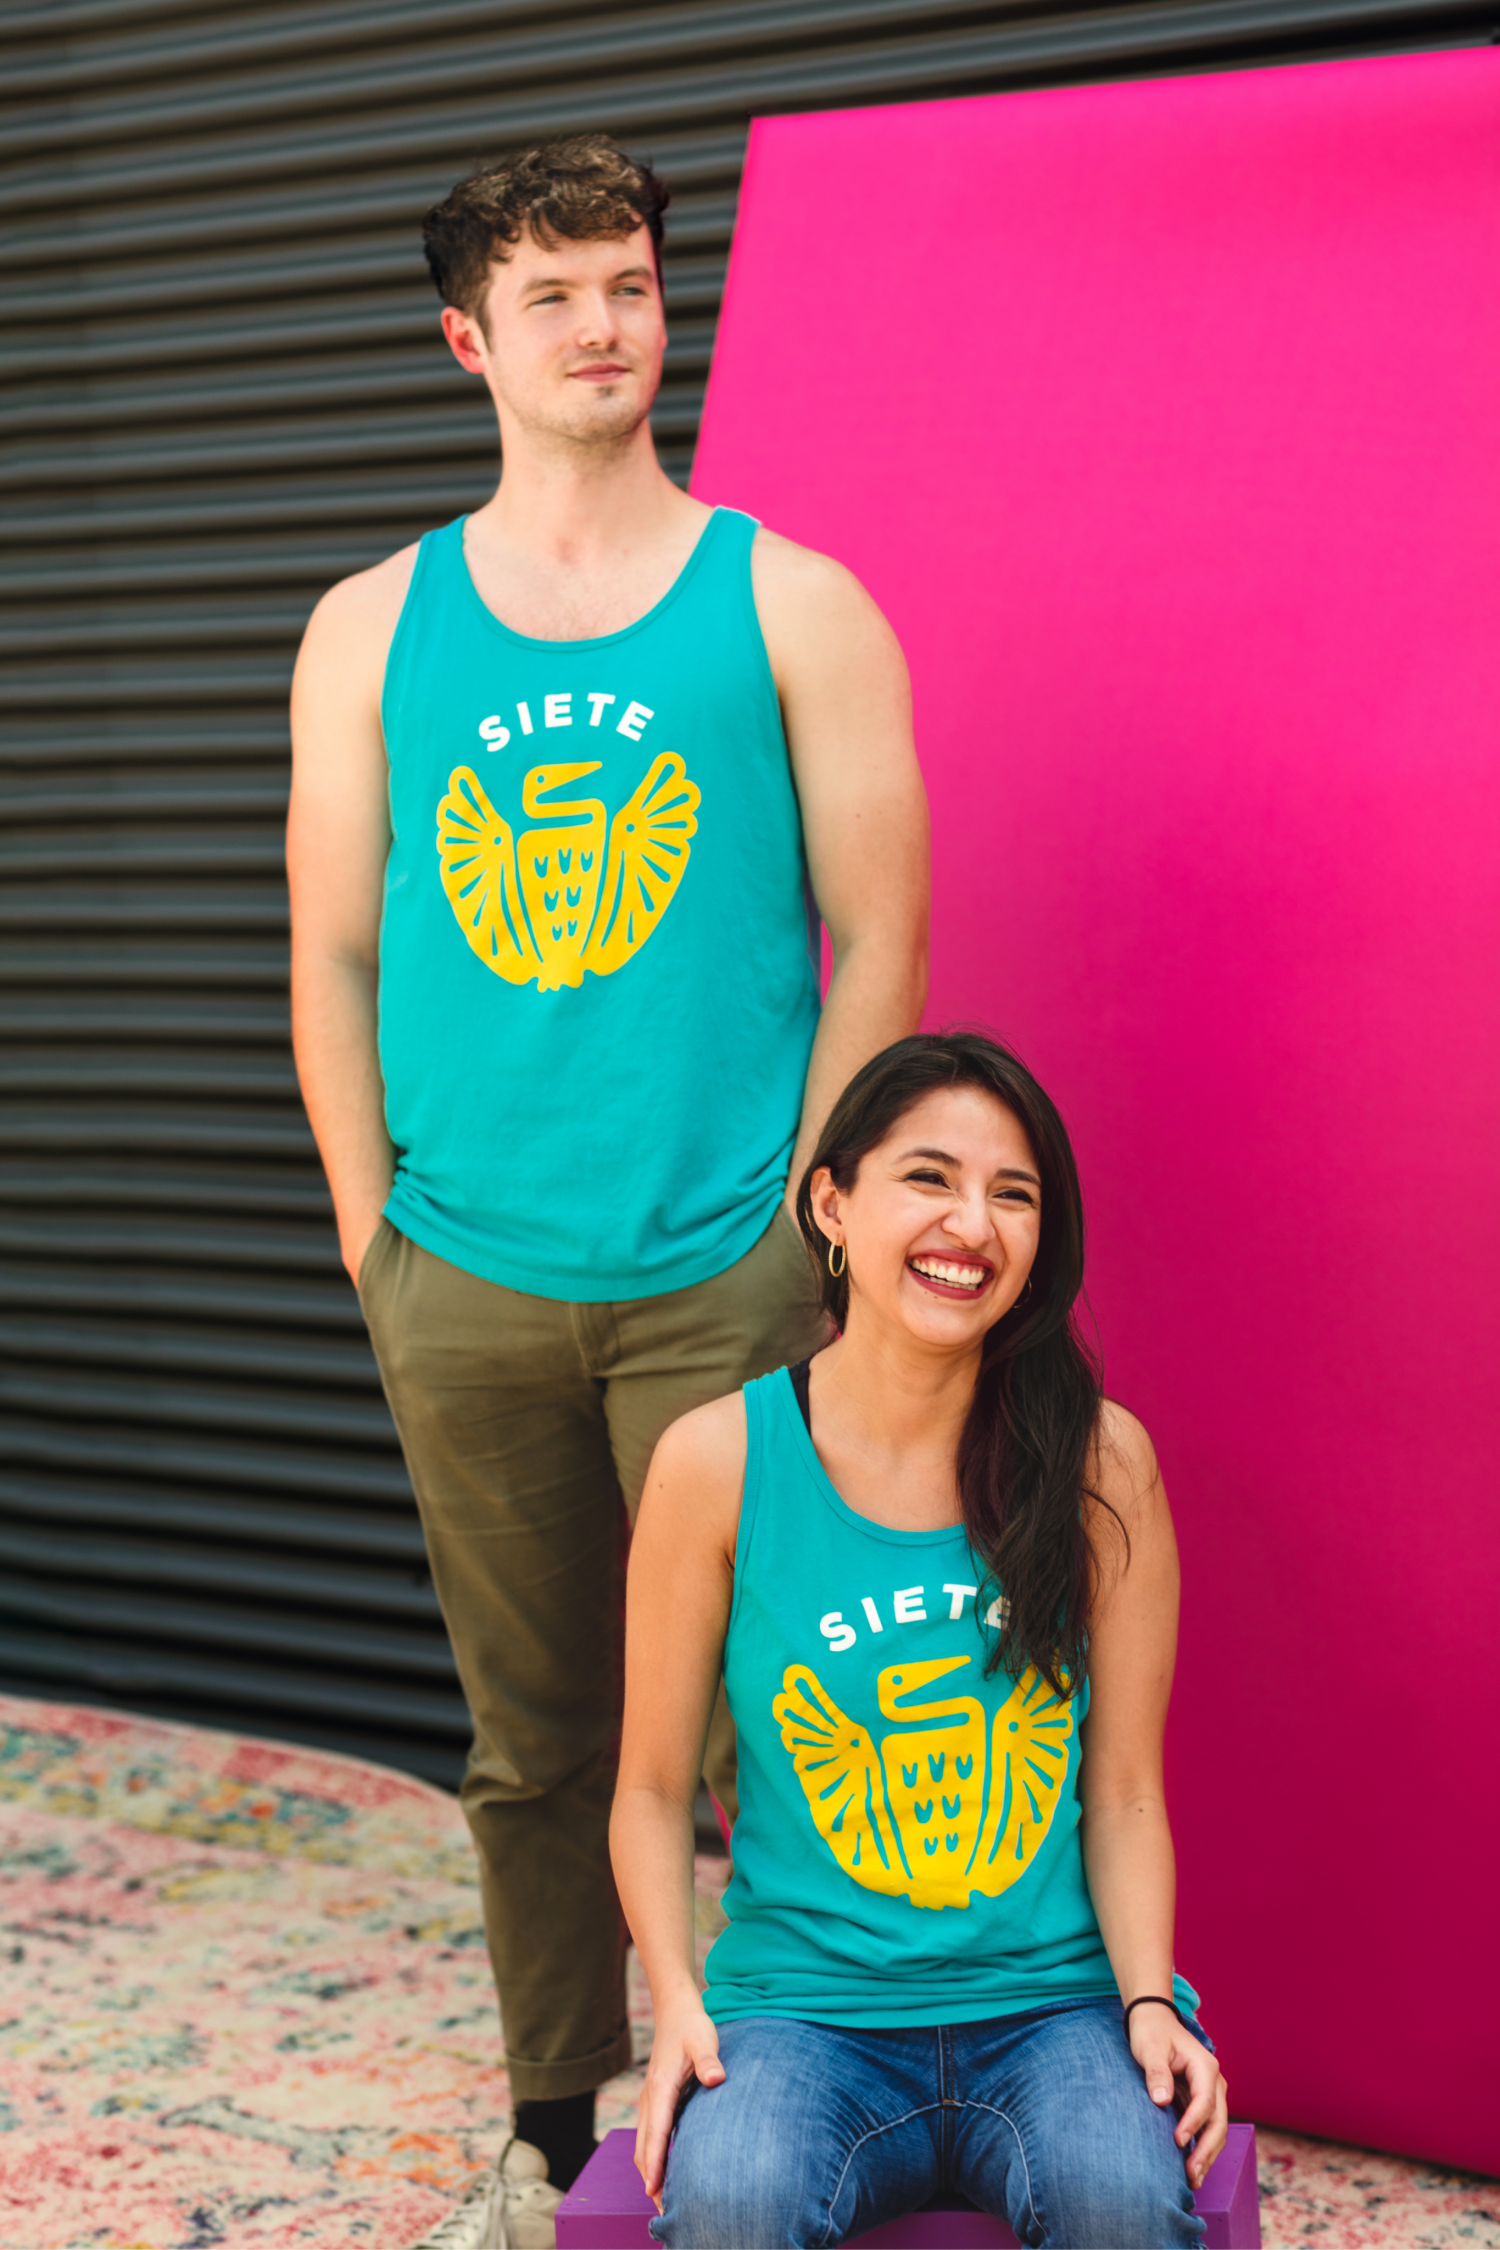 teal tank tops - non gender